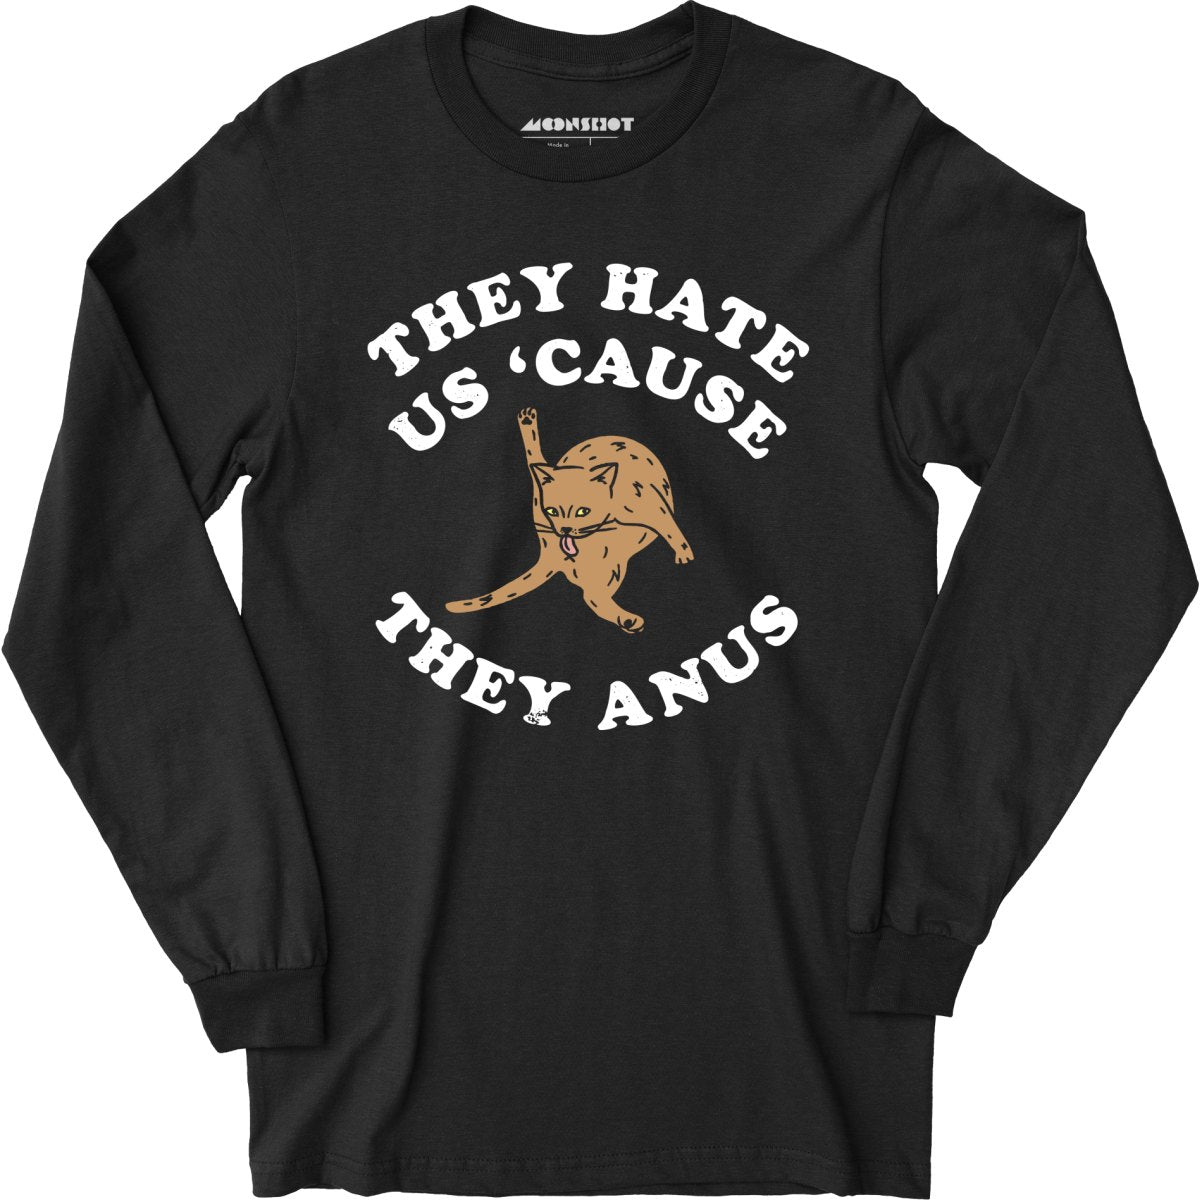 They Hate Us Cause They Anus - Long Sleeve T-Shirt